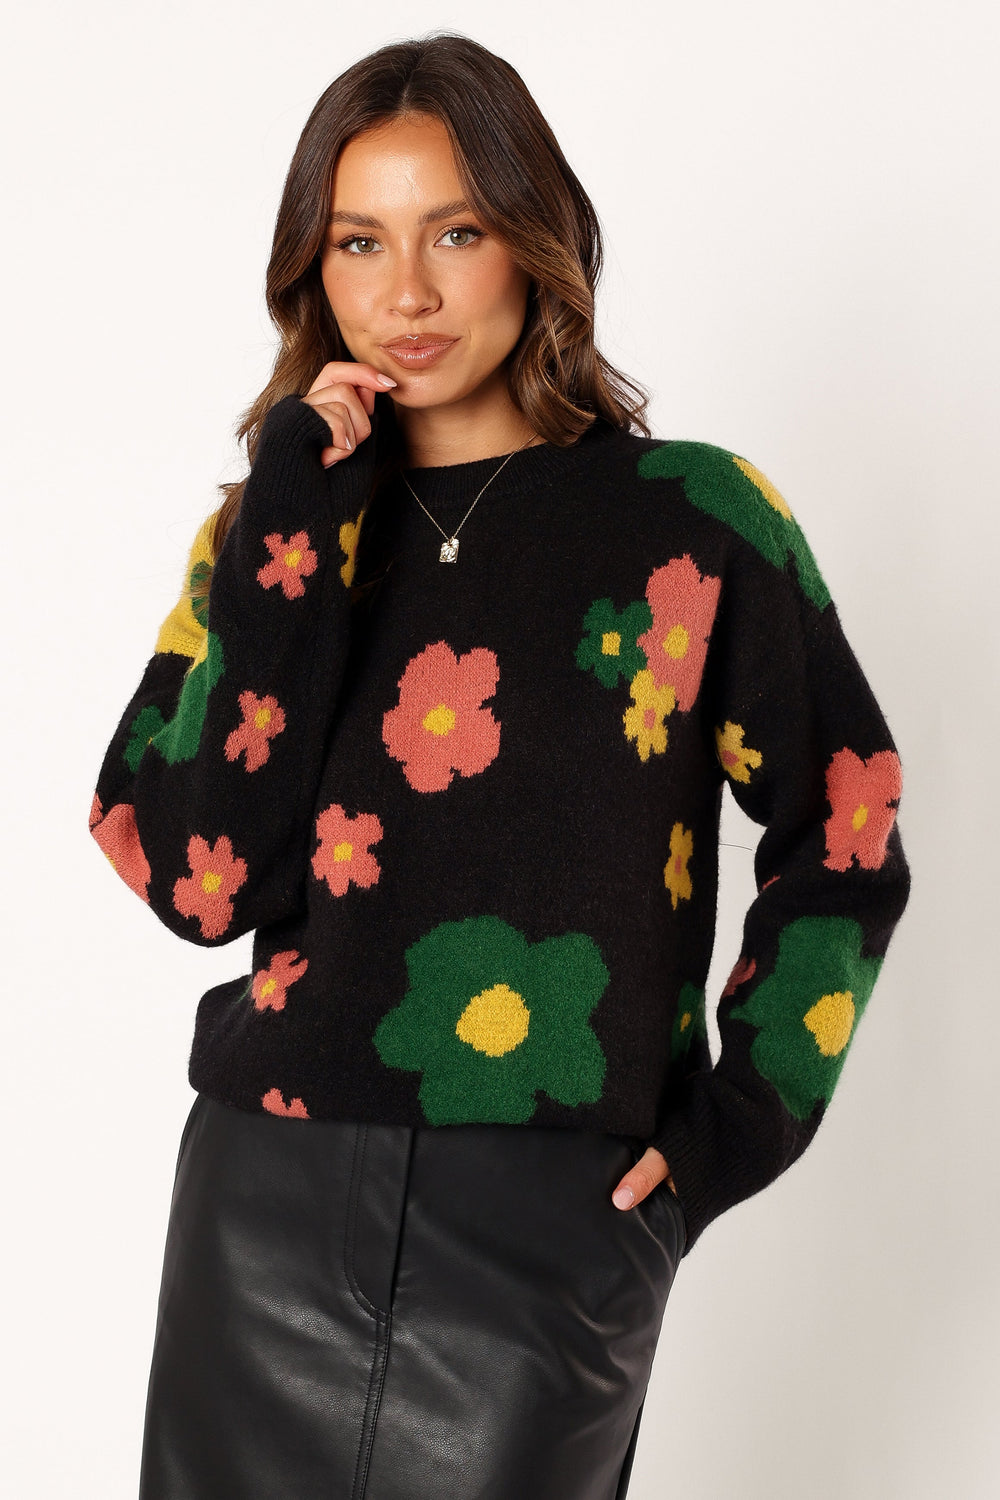 Petal and Pup USA KNITWEAR Lexie Multi Color Flower Knit Sweater - Black Multi